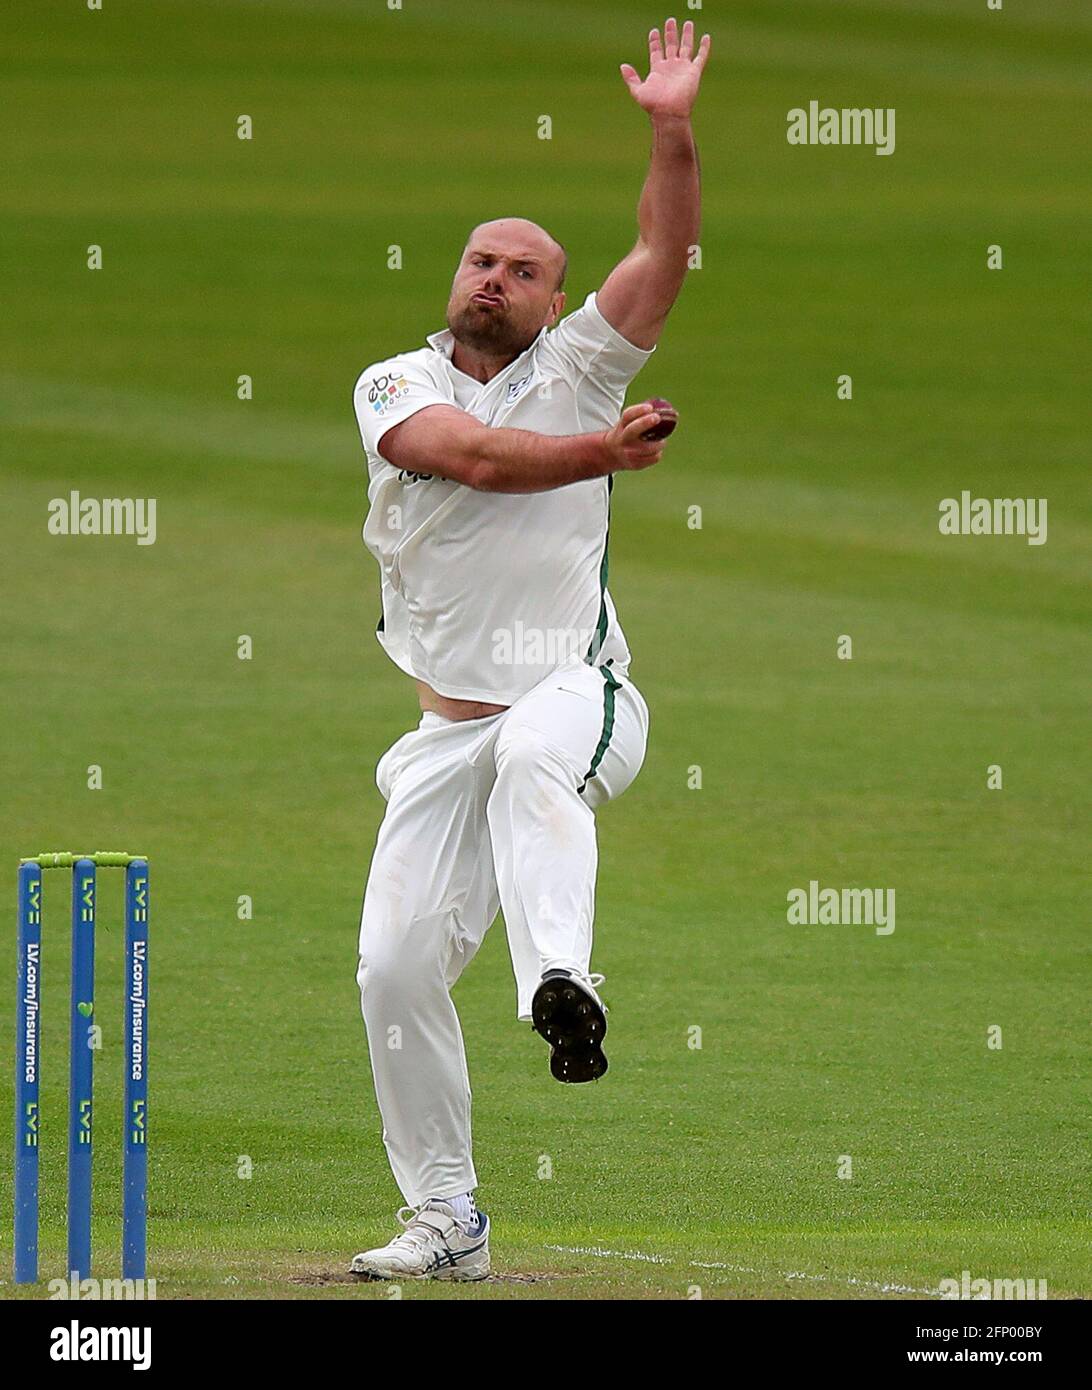 Worcestershire's Joe Leach bowls during day one of the LV= Insurance County Championship match at Trent Bridge, Nottingham. Picture date: Thursday May 20, 2021. Stock Photo